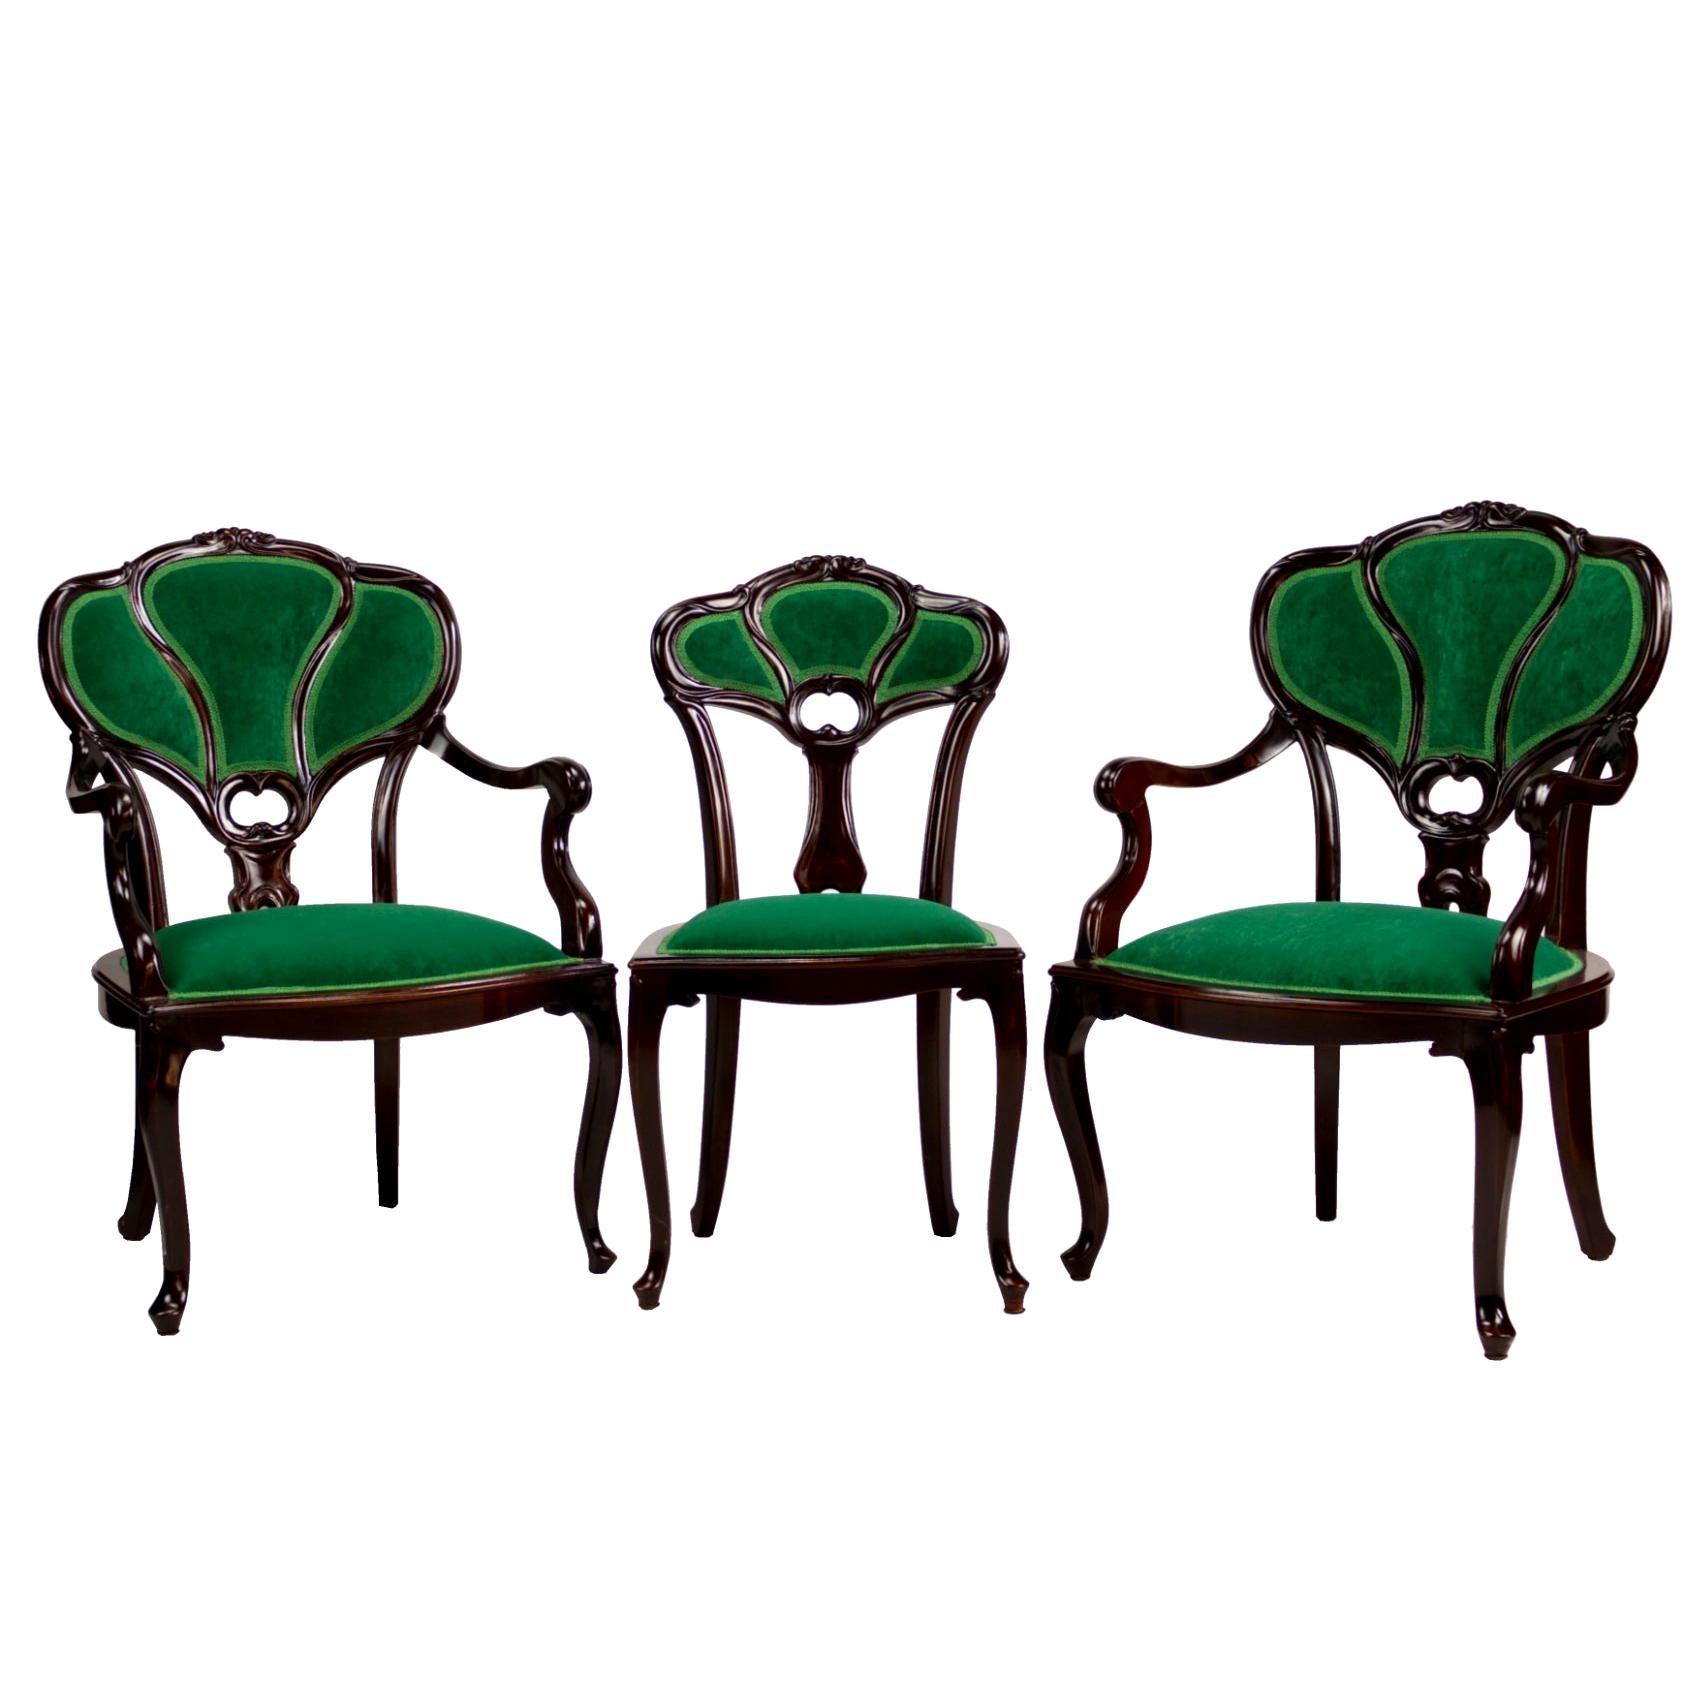 Set of Three Hand Carved Art Nouveau Chairs, circa 1900